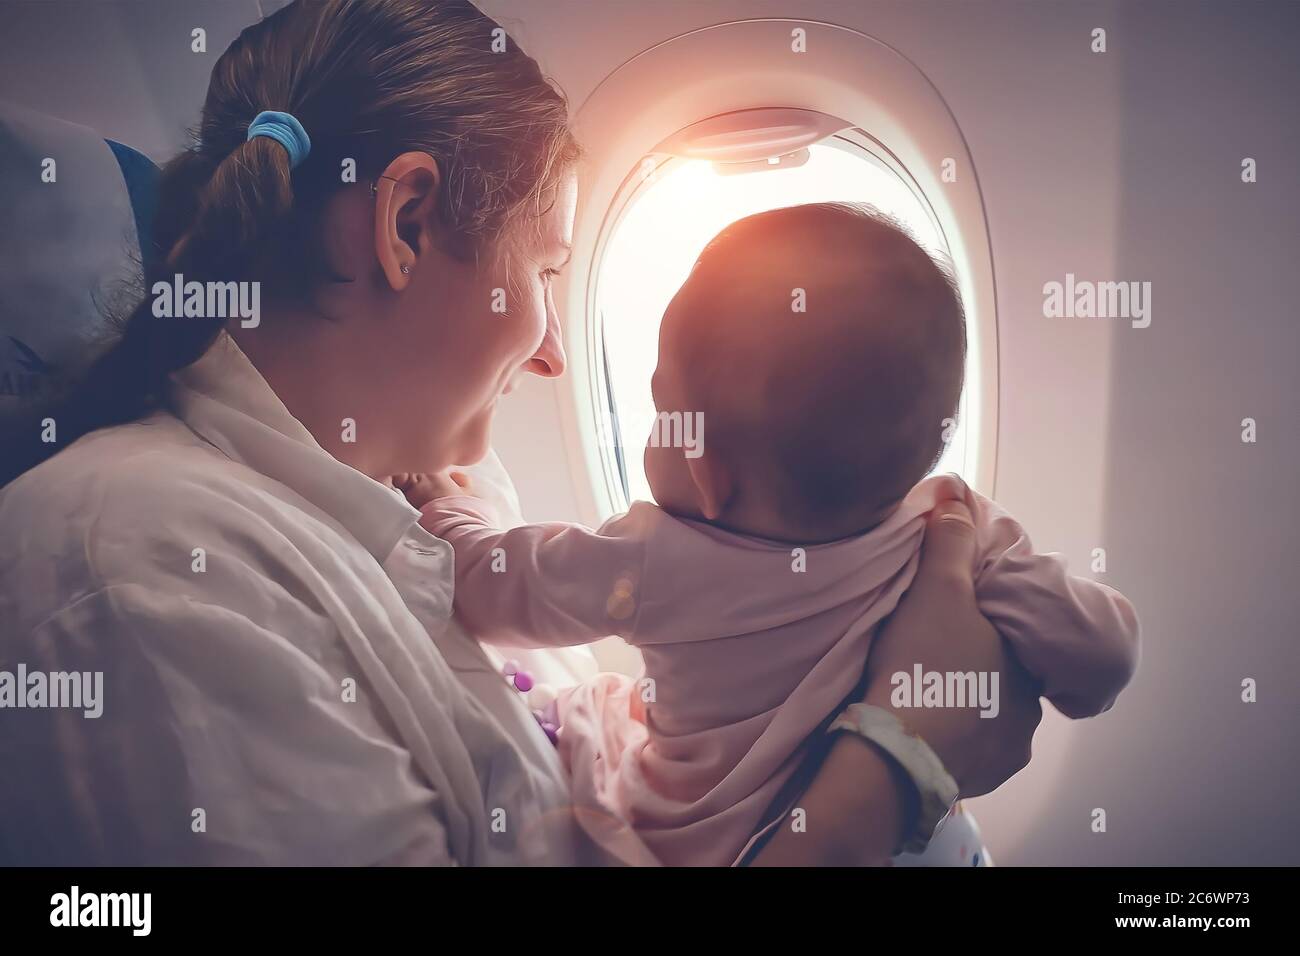 Mother with a small infant baby in her arms flying on the airplane. They look out the window with interest. Stock Photo